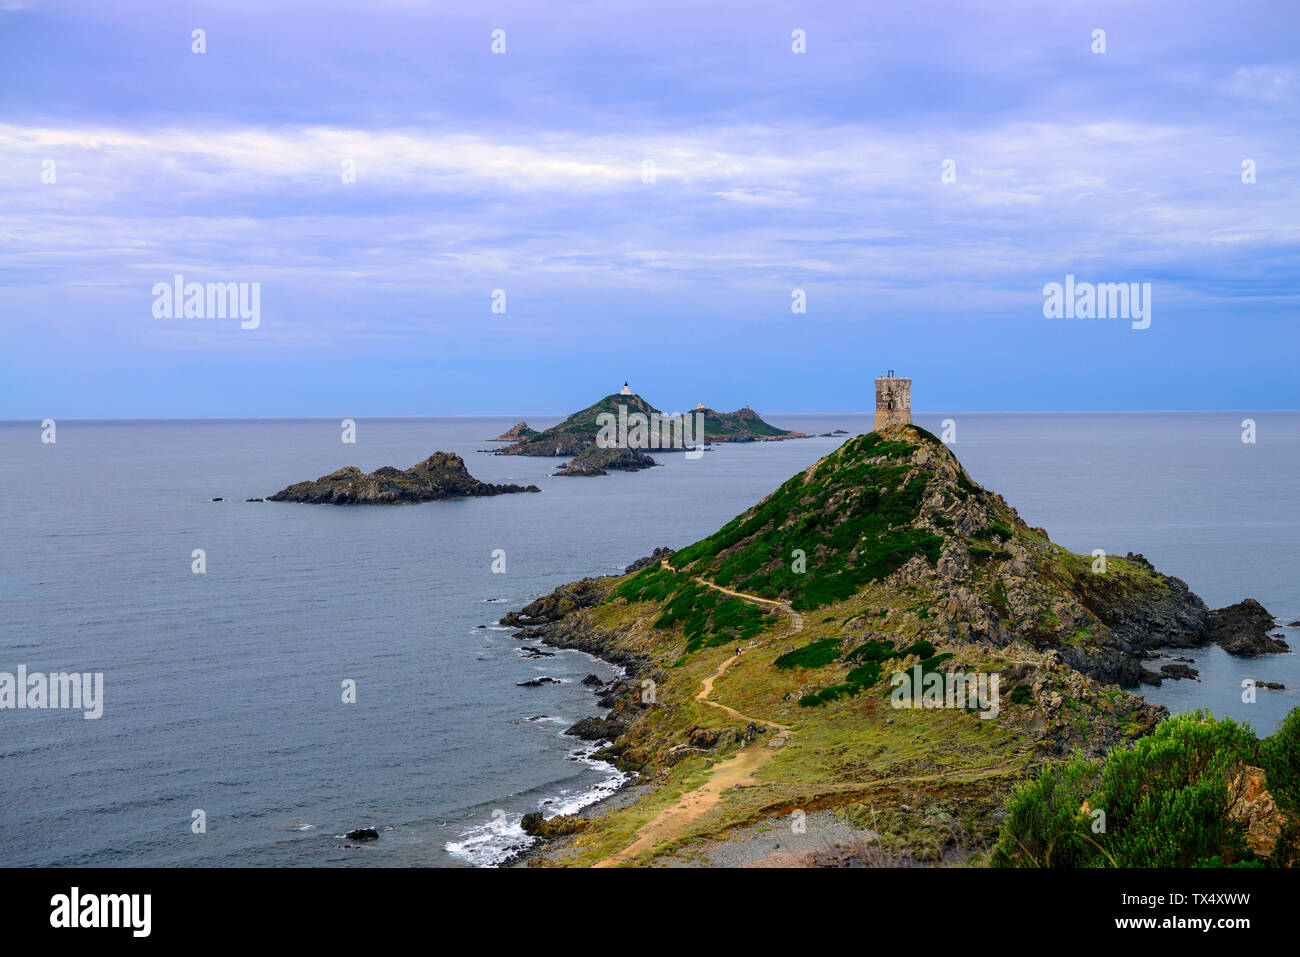 France, Corsica, view over Illes Sanguinaires and genoese tower from the Pointe de la Parata Stock Photo